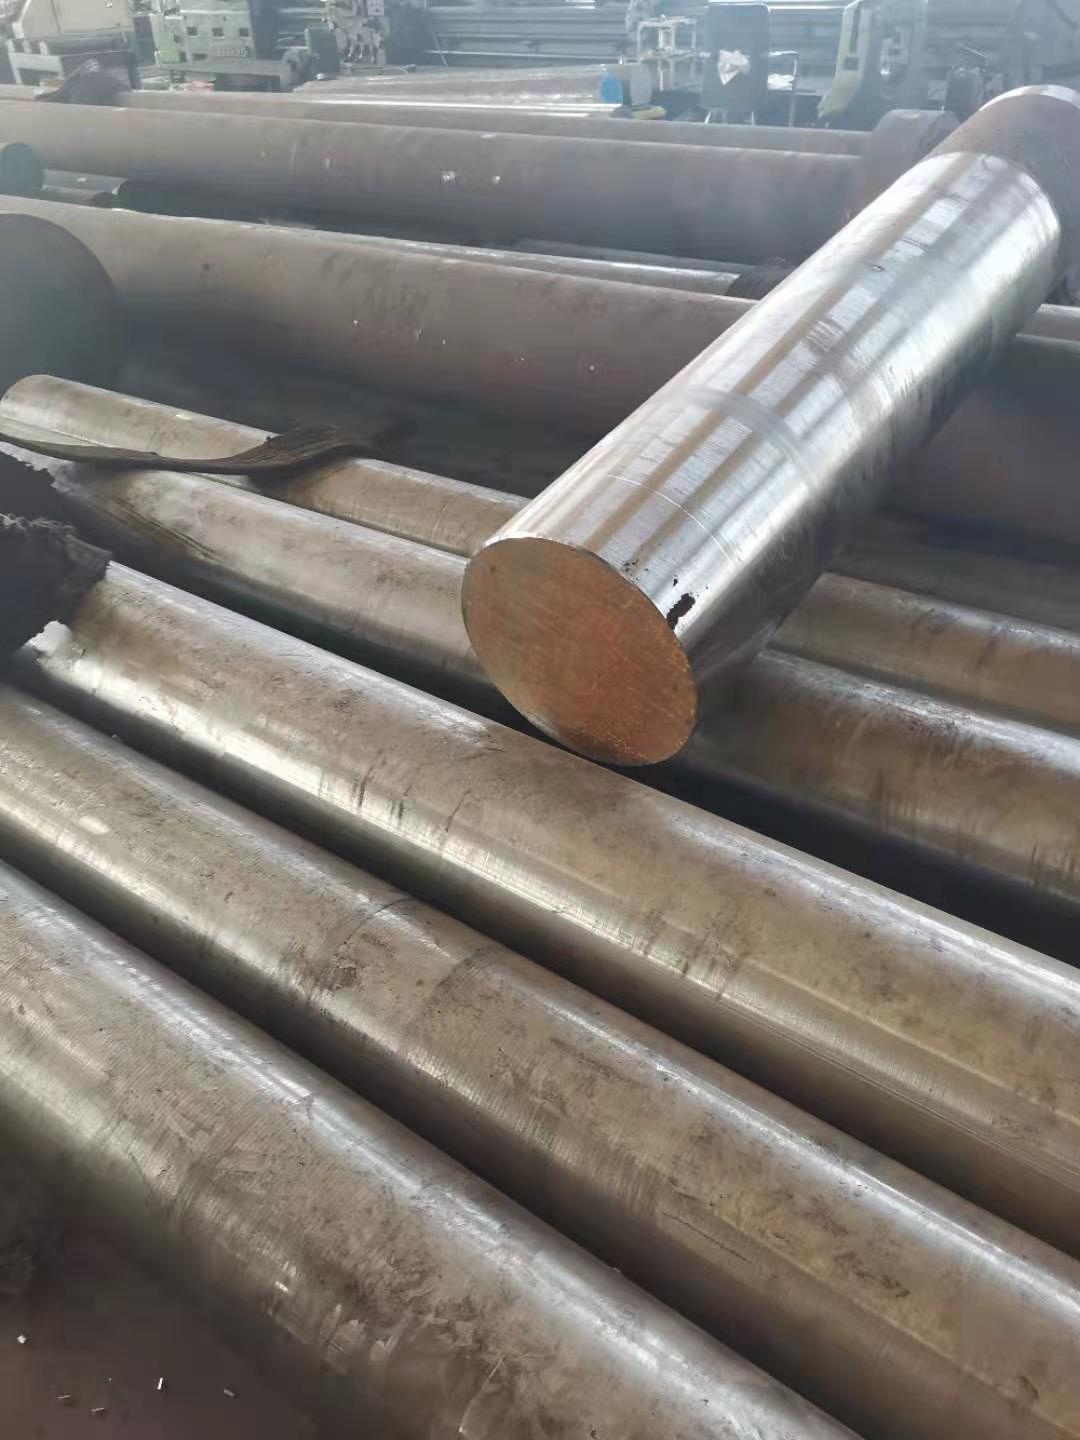 China wholesale High Speed Steel Rod - HSS material High quality round bar M1 M2 M42 1.3327 1.3343 1.3351 1.3247 high speed tool steel – Herui detail pictures